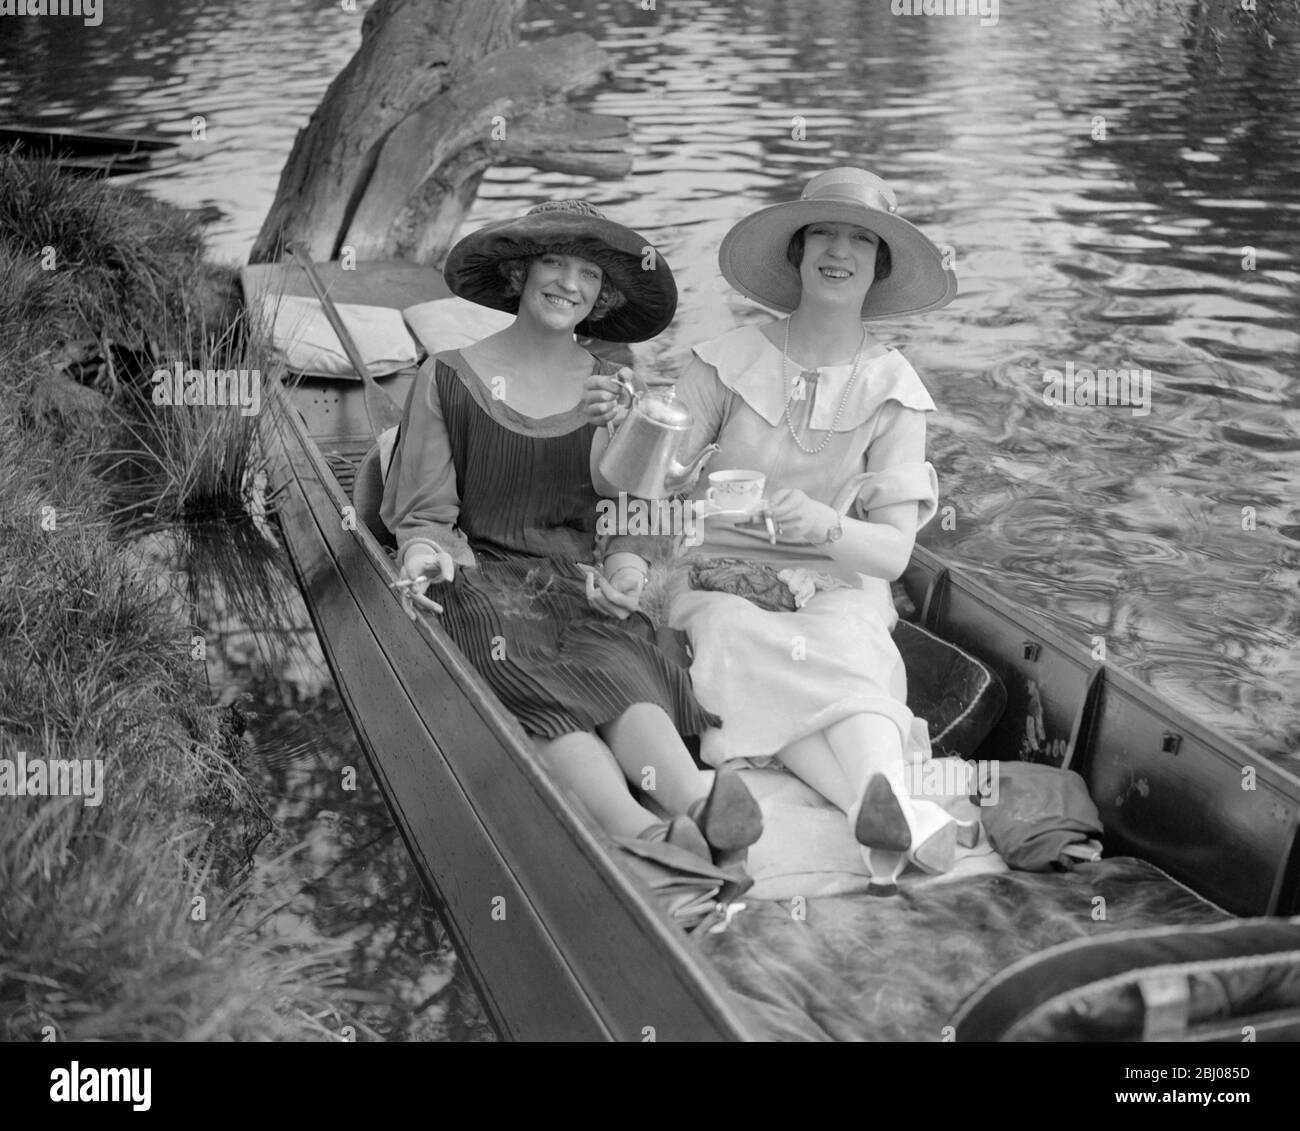 A gondola makes its first appearance of the season at the Karsino, Hampton Court. It is chartered by a party of Brighter London Hippodrome girls. - Alfieri, 6 May 1923 - - - - - - - - - - - - - - - Stock Photo